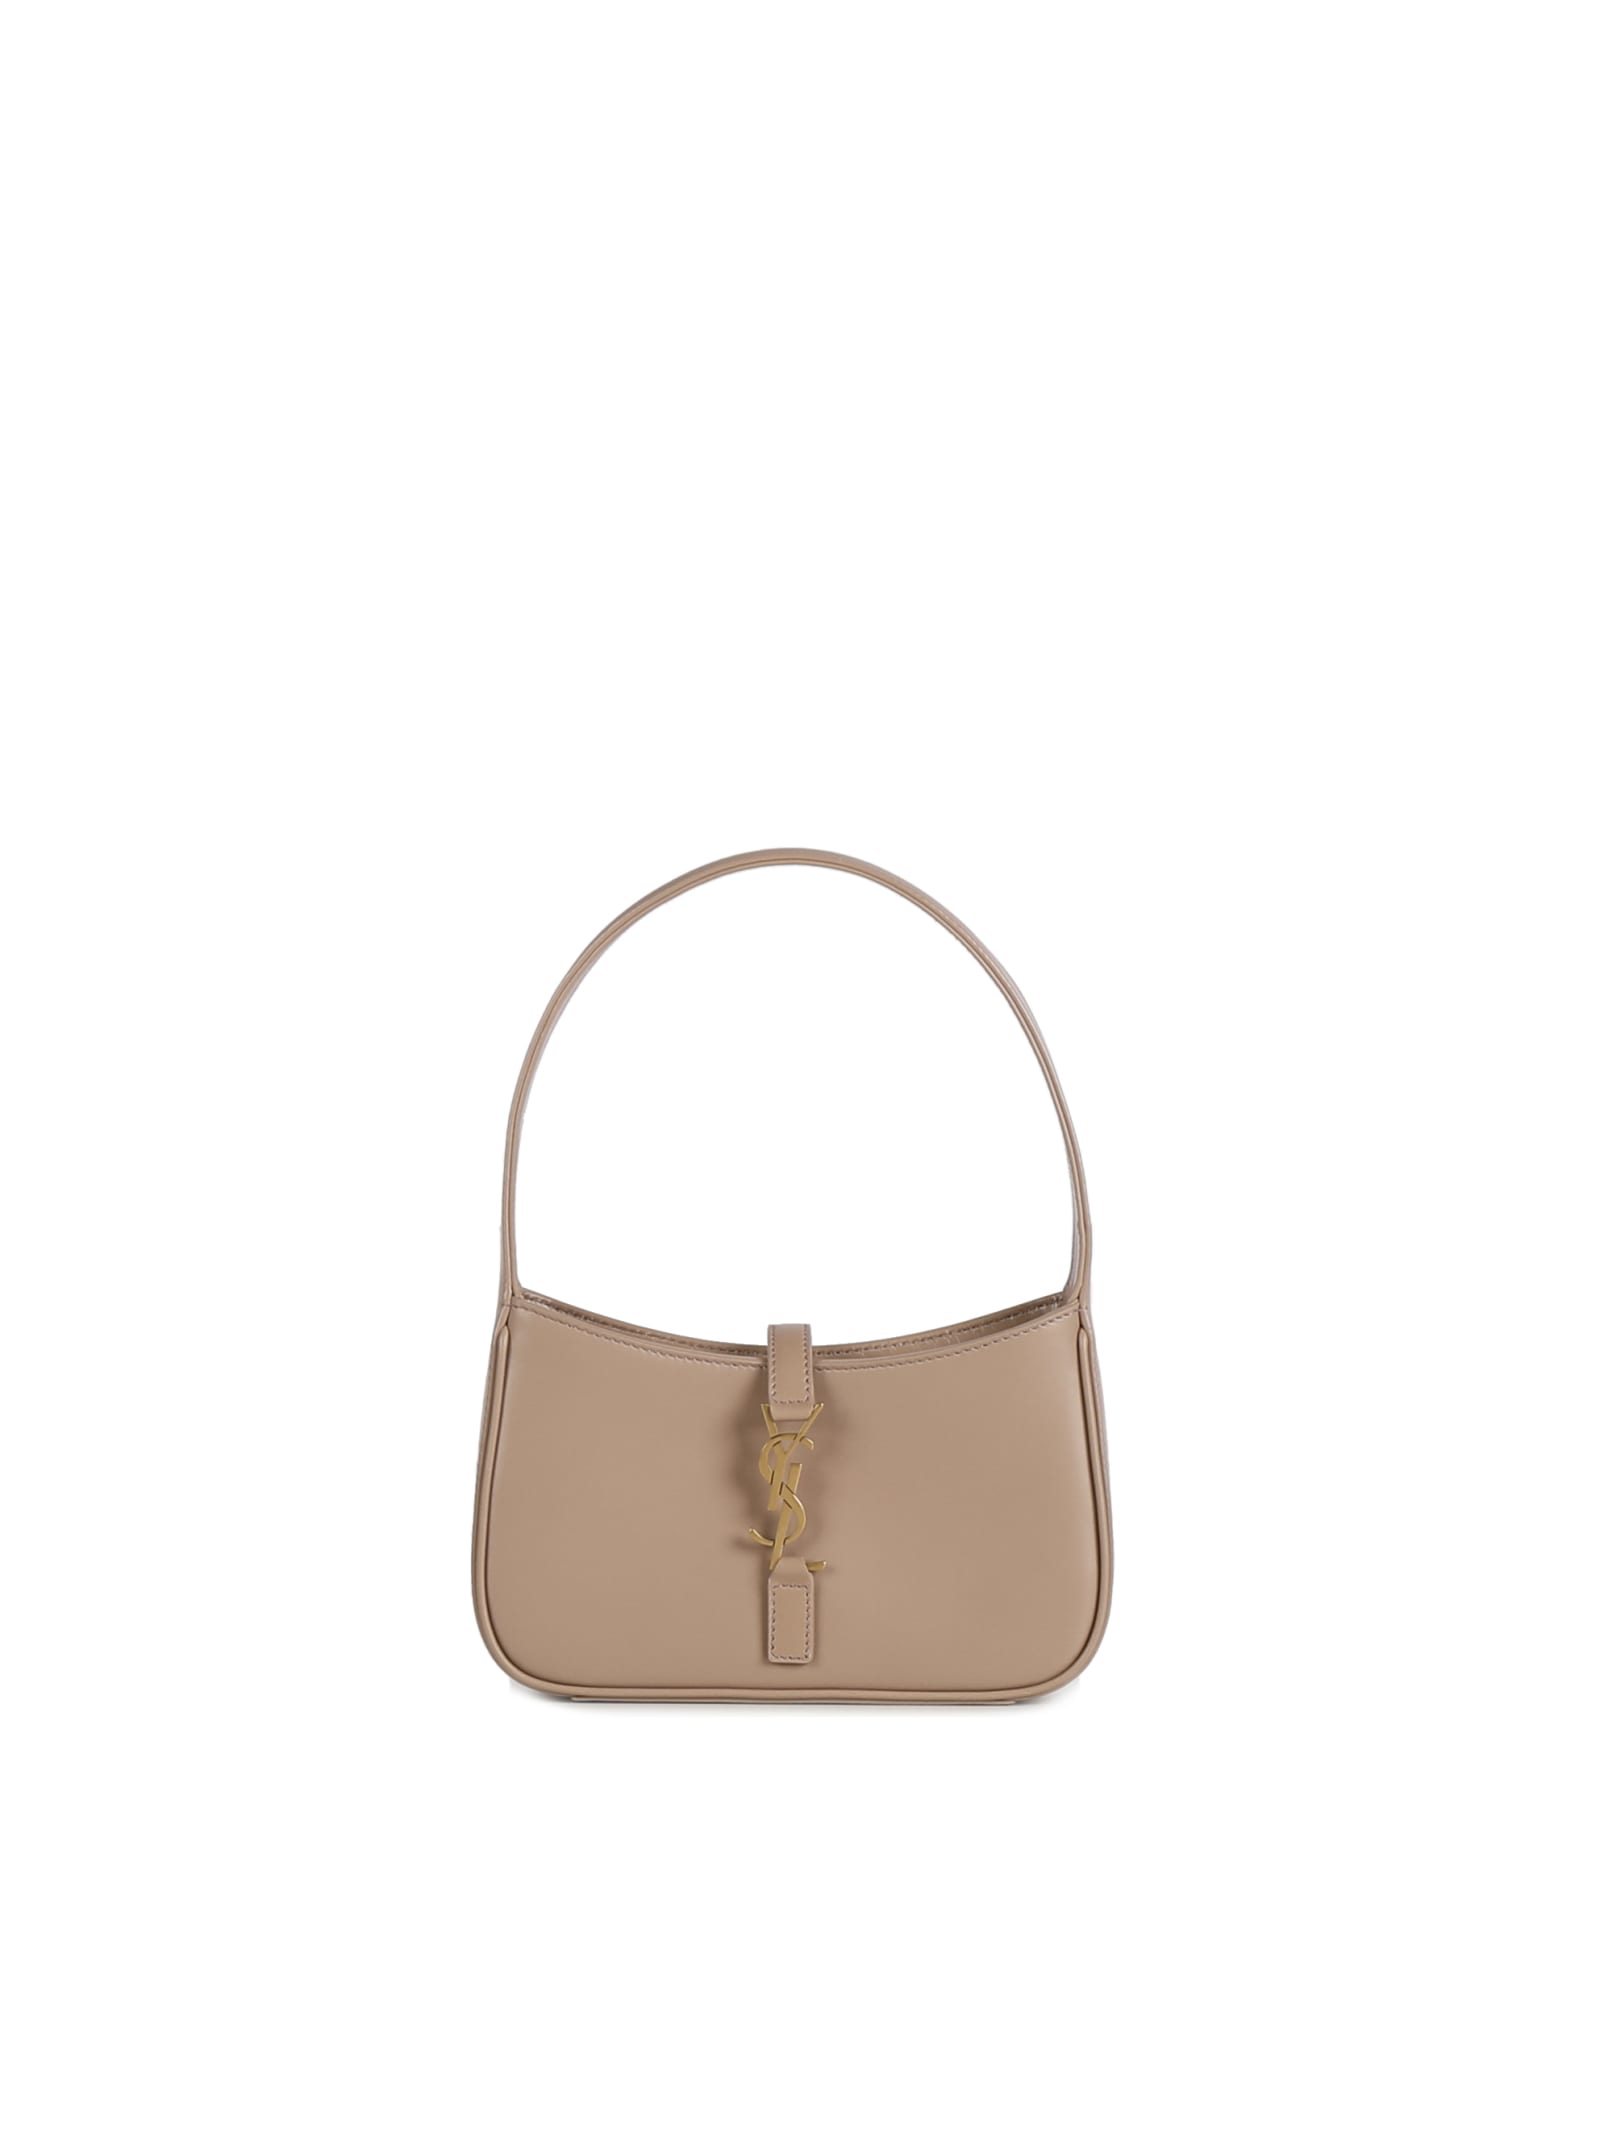 SAINT LAURENT HOBO BAG LE 5 À 7 MINI IN SMOOTH LEATHER